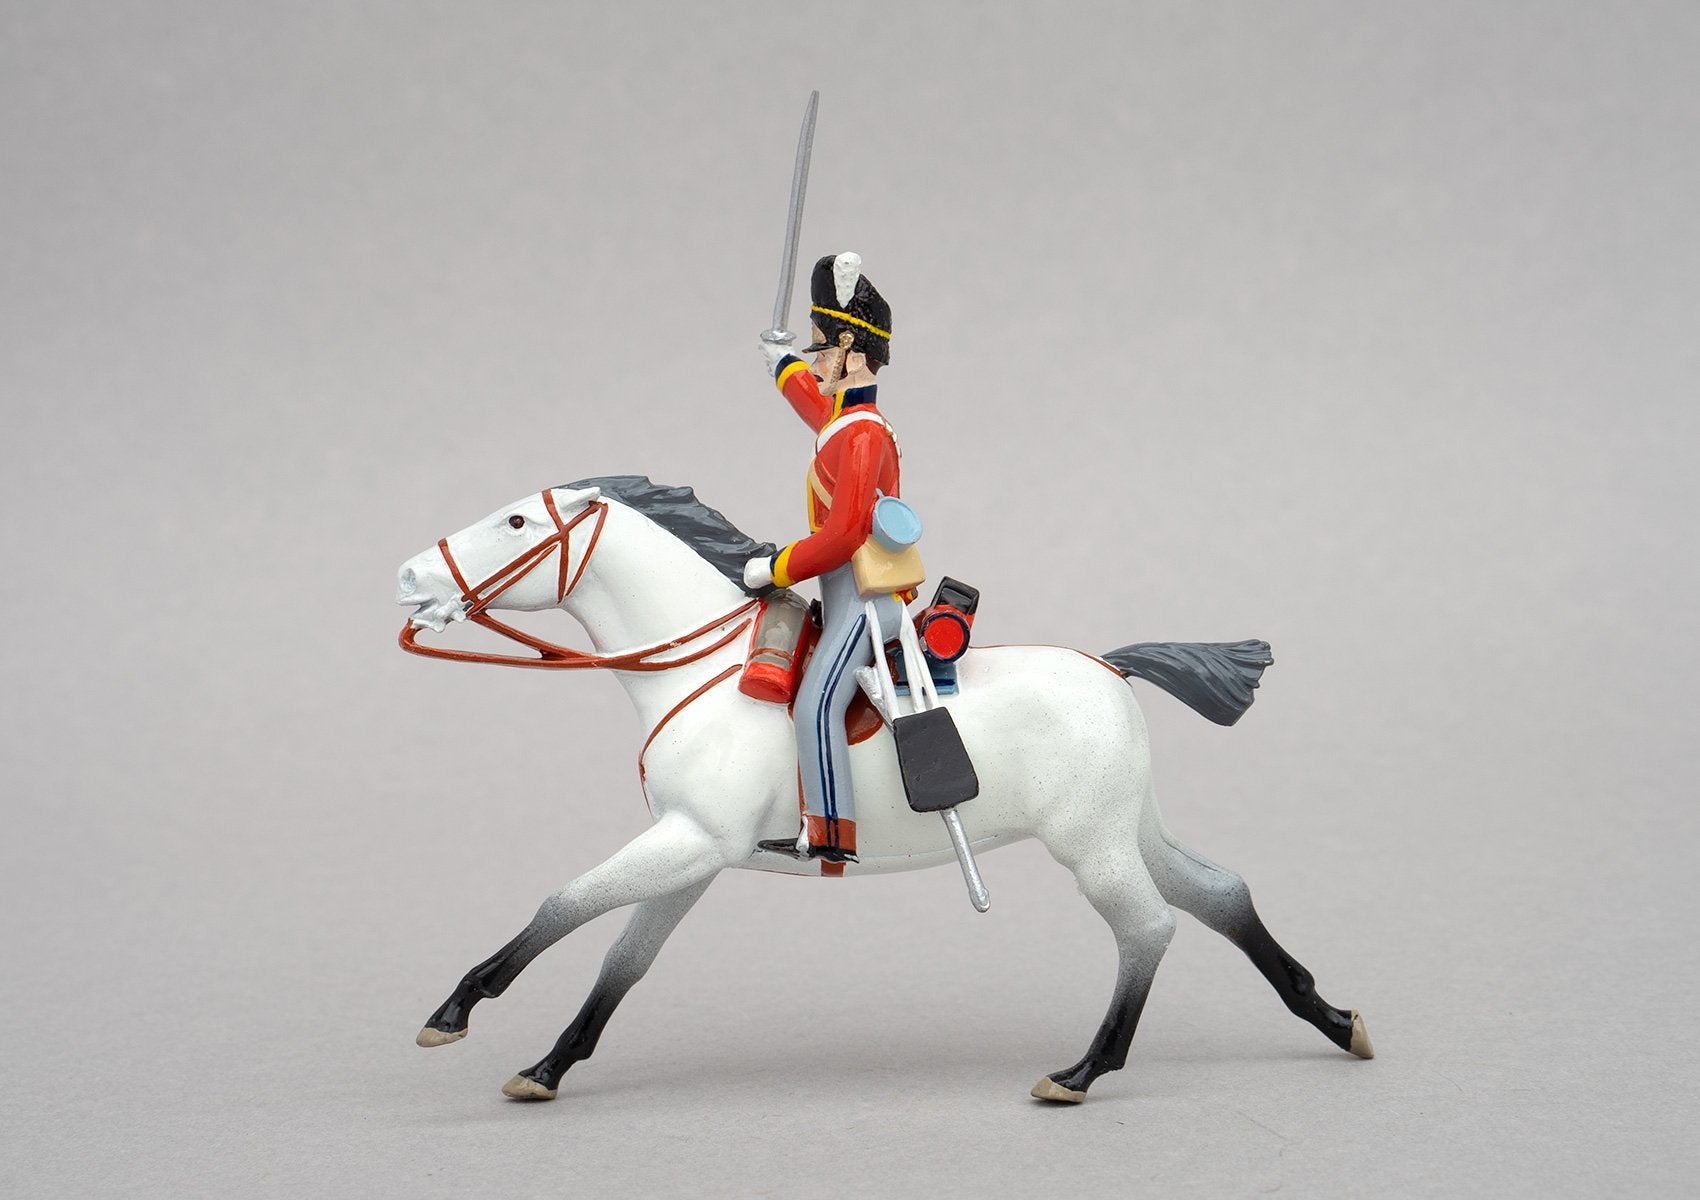 Set 152 Scots Greys, Waterloo 1815 | British Cavalry | Napoleonic Wars | Single mounted Heavy Dragoon with tall bearskin hat, grey mount, sabre and carbine | Waterloo | © Imperial Productions | Sculpt by David Cowe